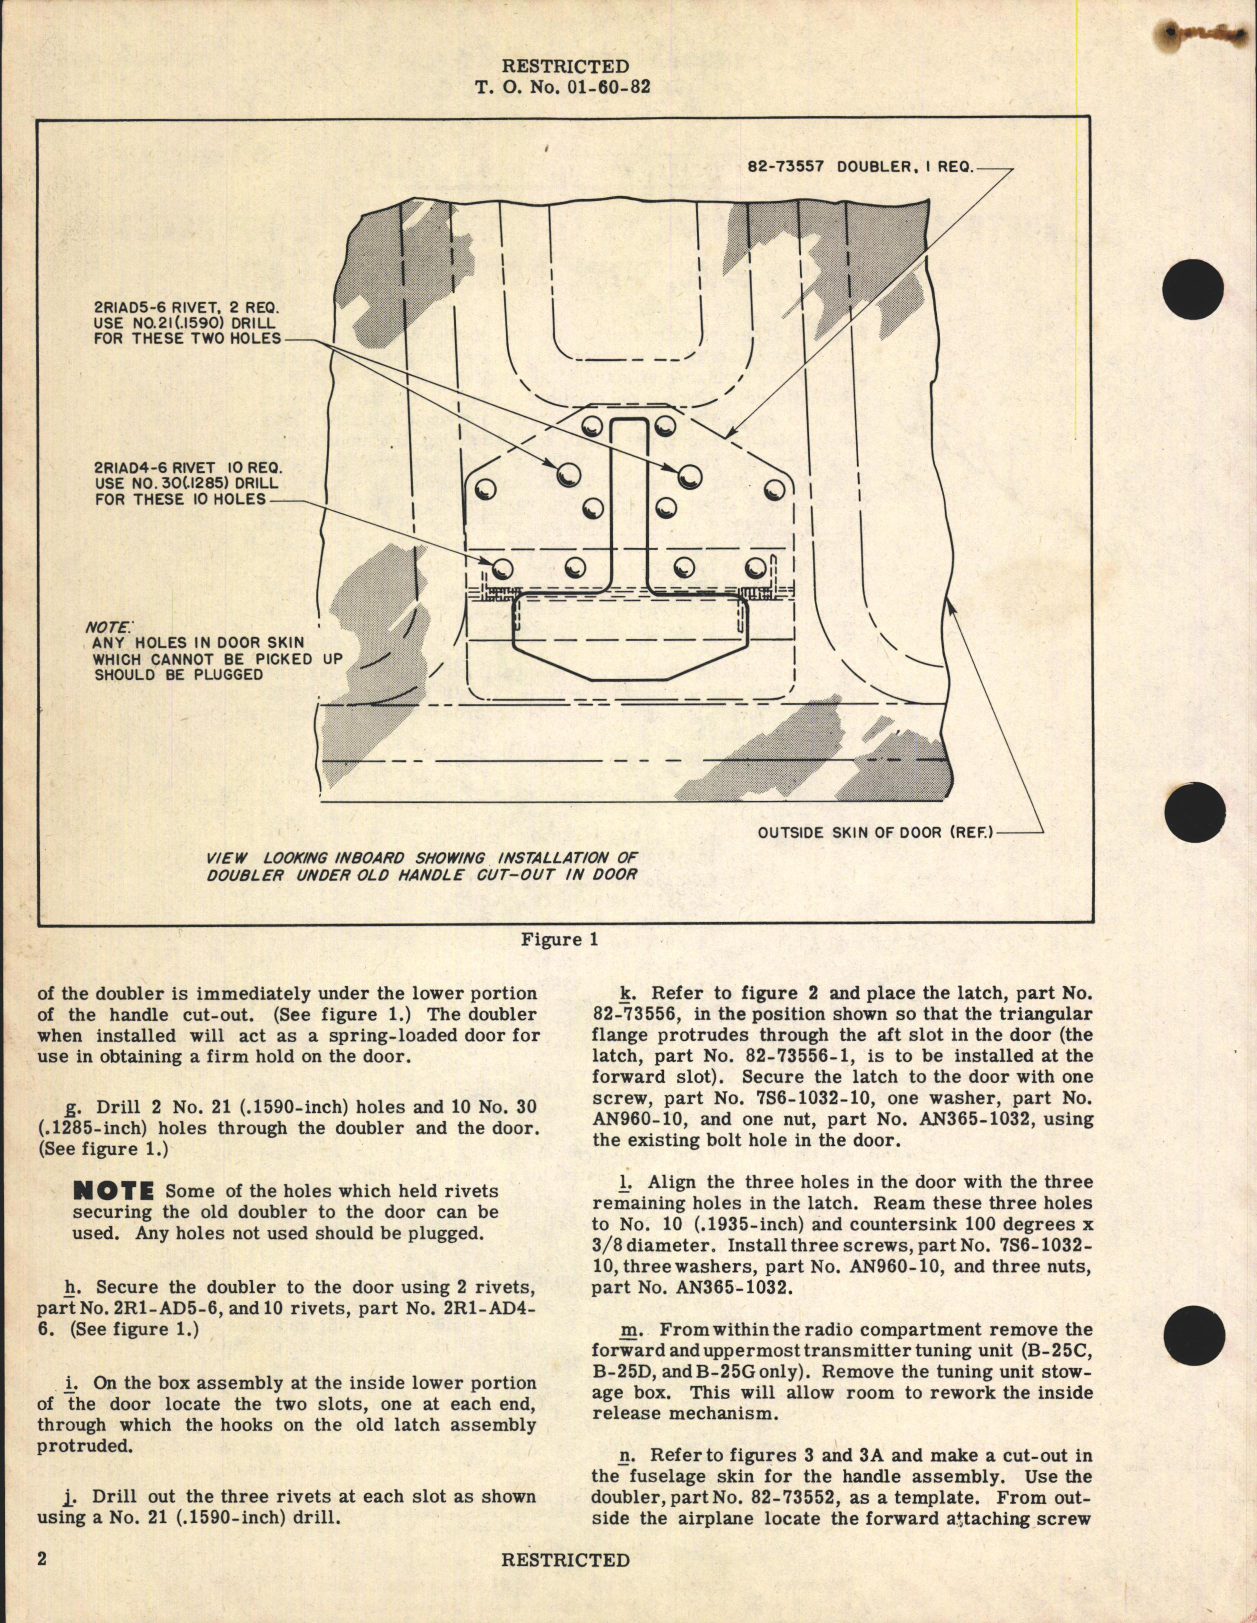 Sample page 2 from AirCorps Library document: Rework of Life Raft Release Mechanism for B-25